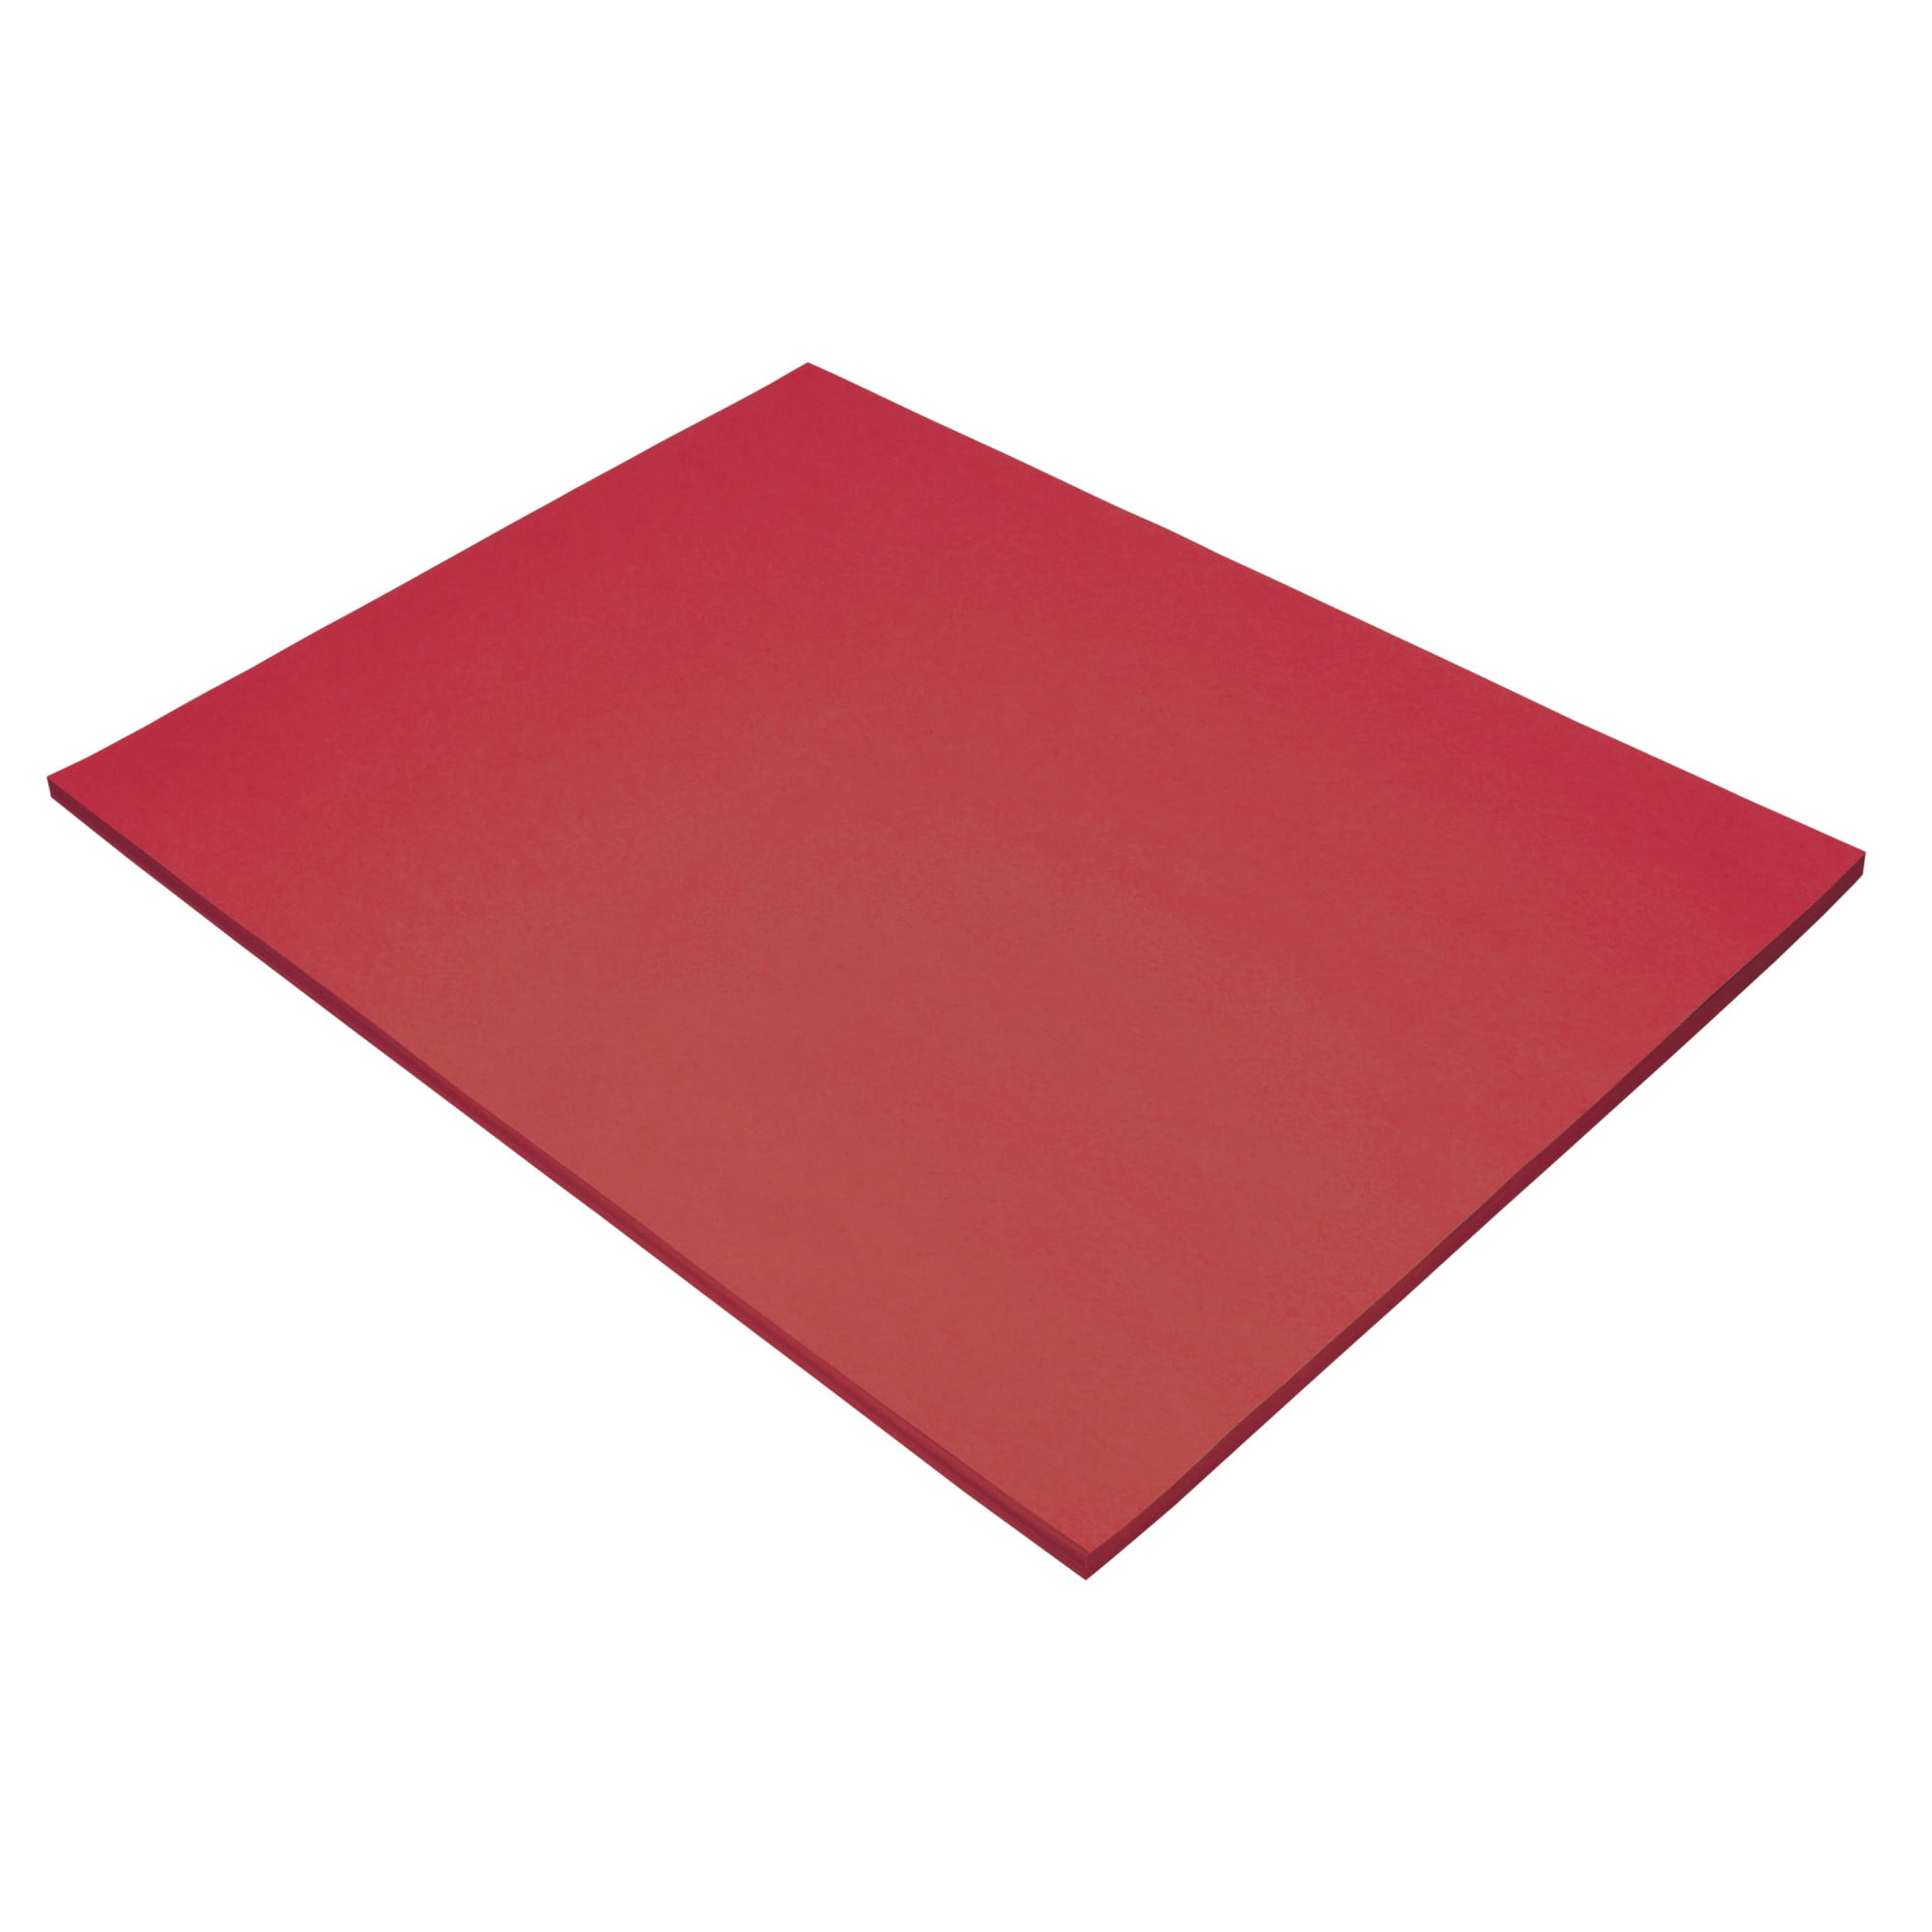 Tru-Ray Construction Paper, 76 lbs., 12 x 18, Festive Red, 50